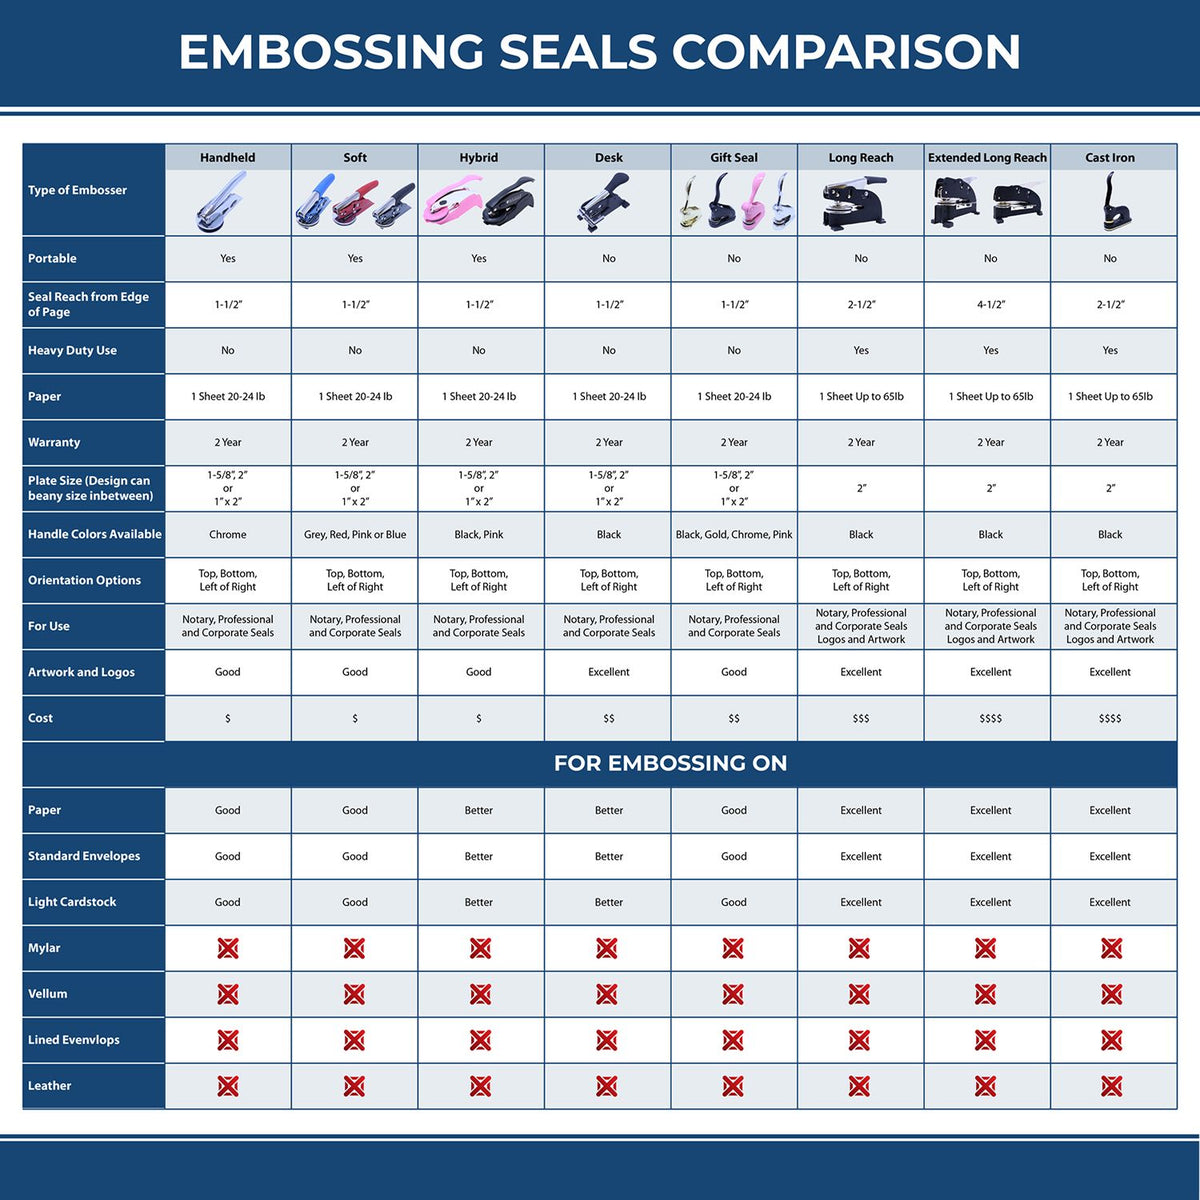 A comparison chart for the different types of mount models available for the Soft Virginia Professional Geologist Seal